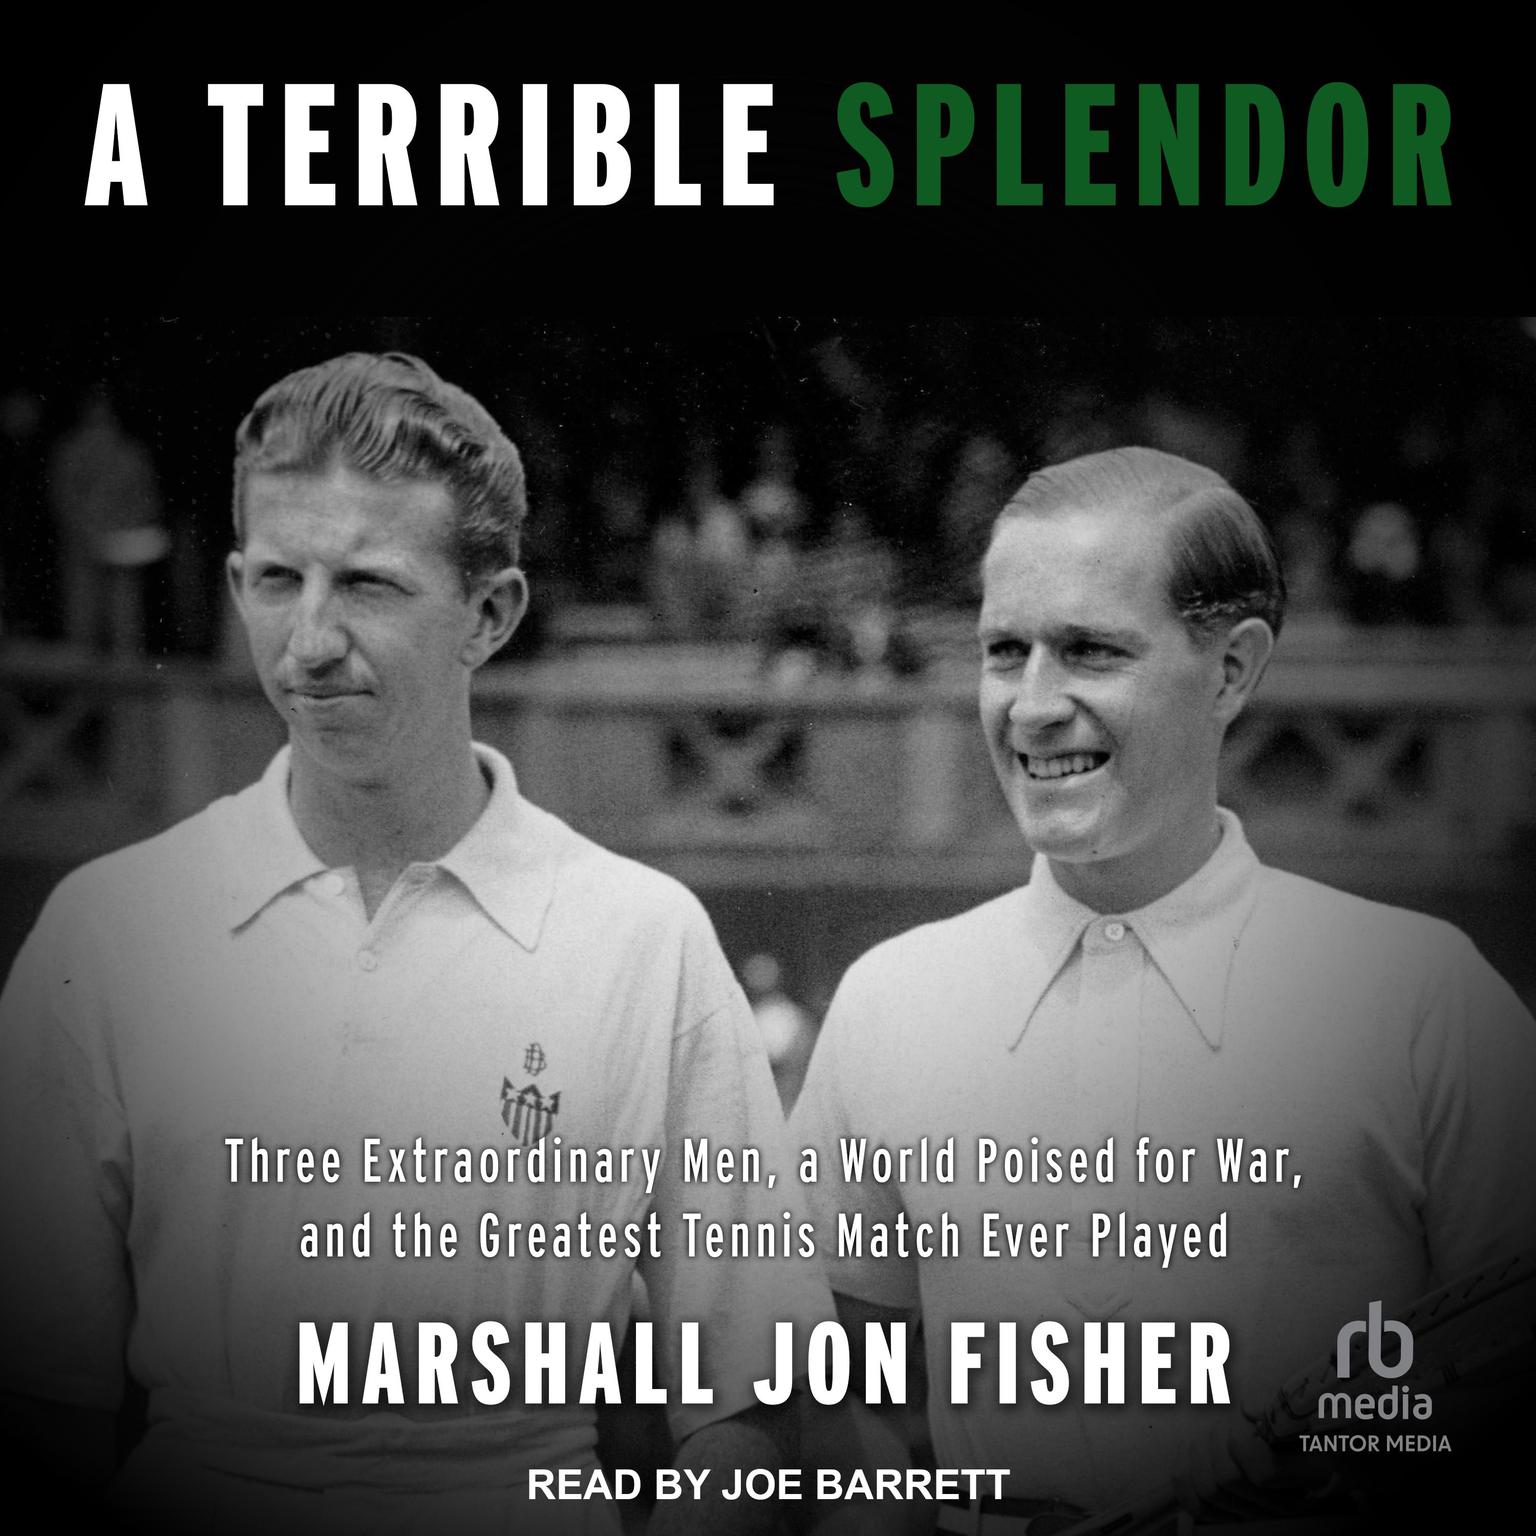 A Terrible Splendor: Three Extraordinary Men, a World Poised for War, and the Greatest Tennis Match Ever Played Audiobook, by Marshall Jon Fisher